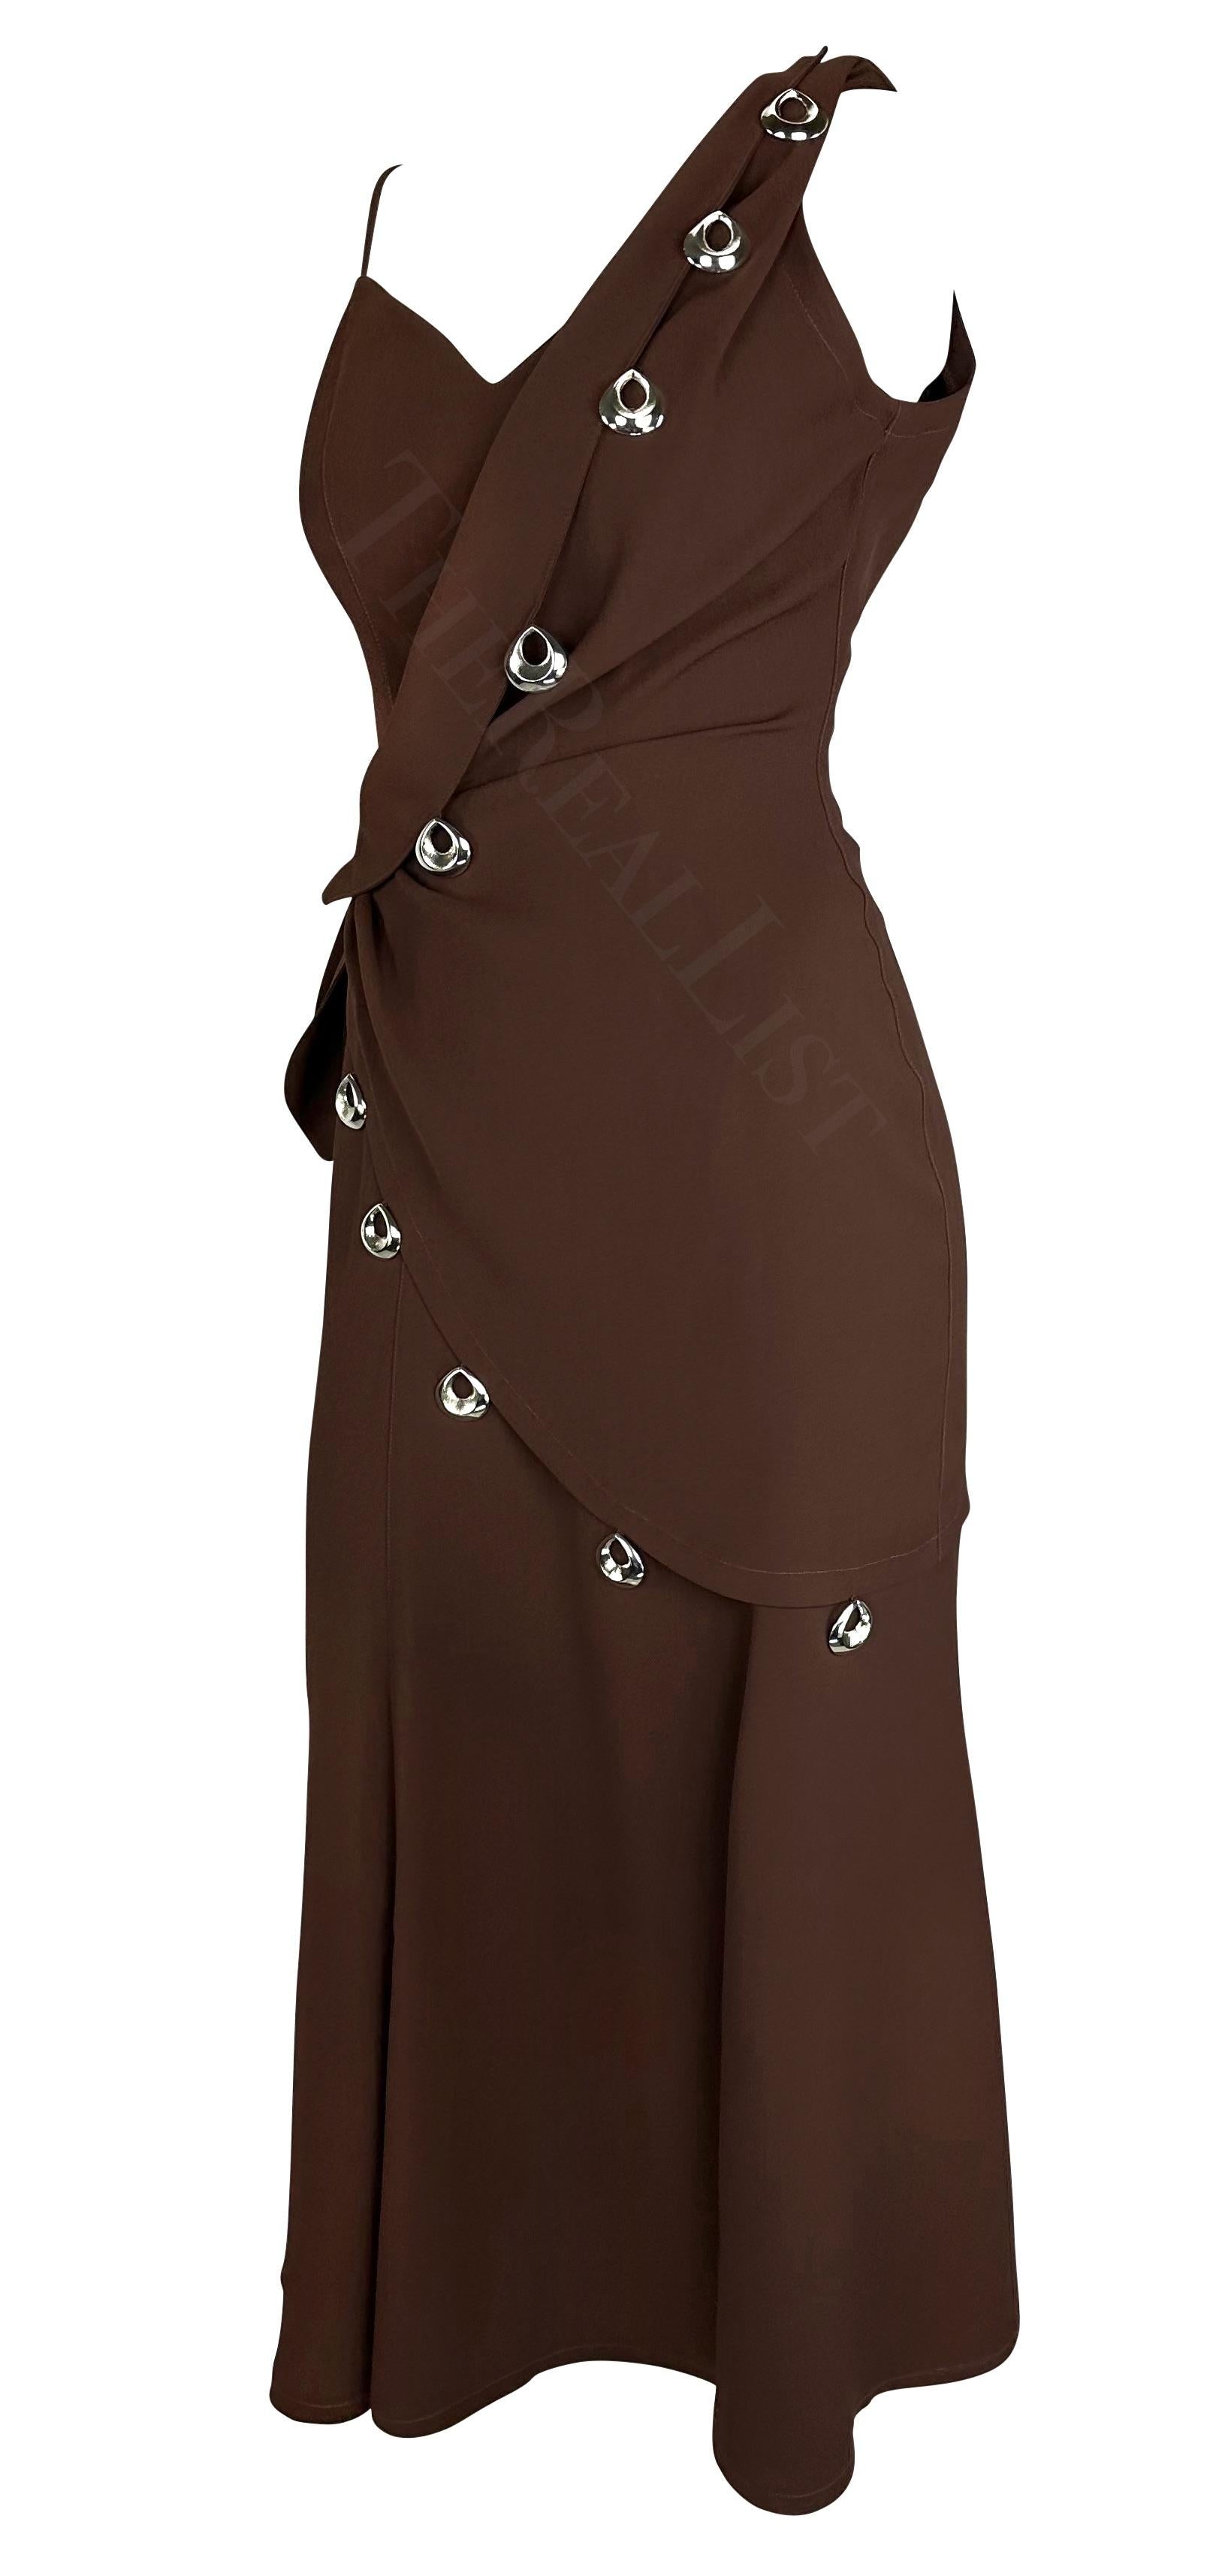 Presenting a brown Thierry Mugler wrap dress, designed by Manfred Mugler. From the Spring/Summer 1998, this midi dress features silver-tone hoop accents and a tie at the waist. Similar pendant detailing was featured on the season's Haute Couture